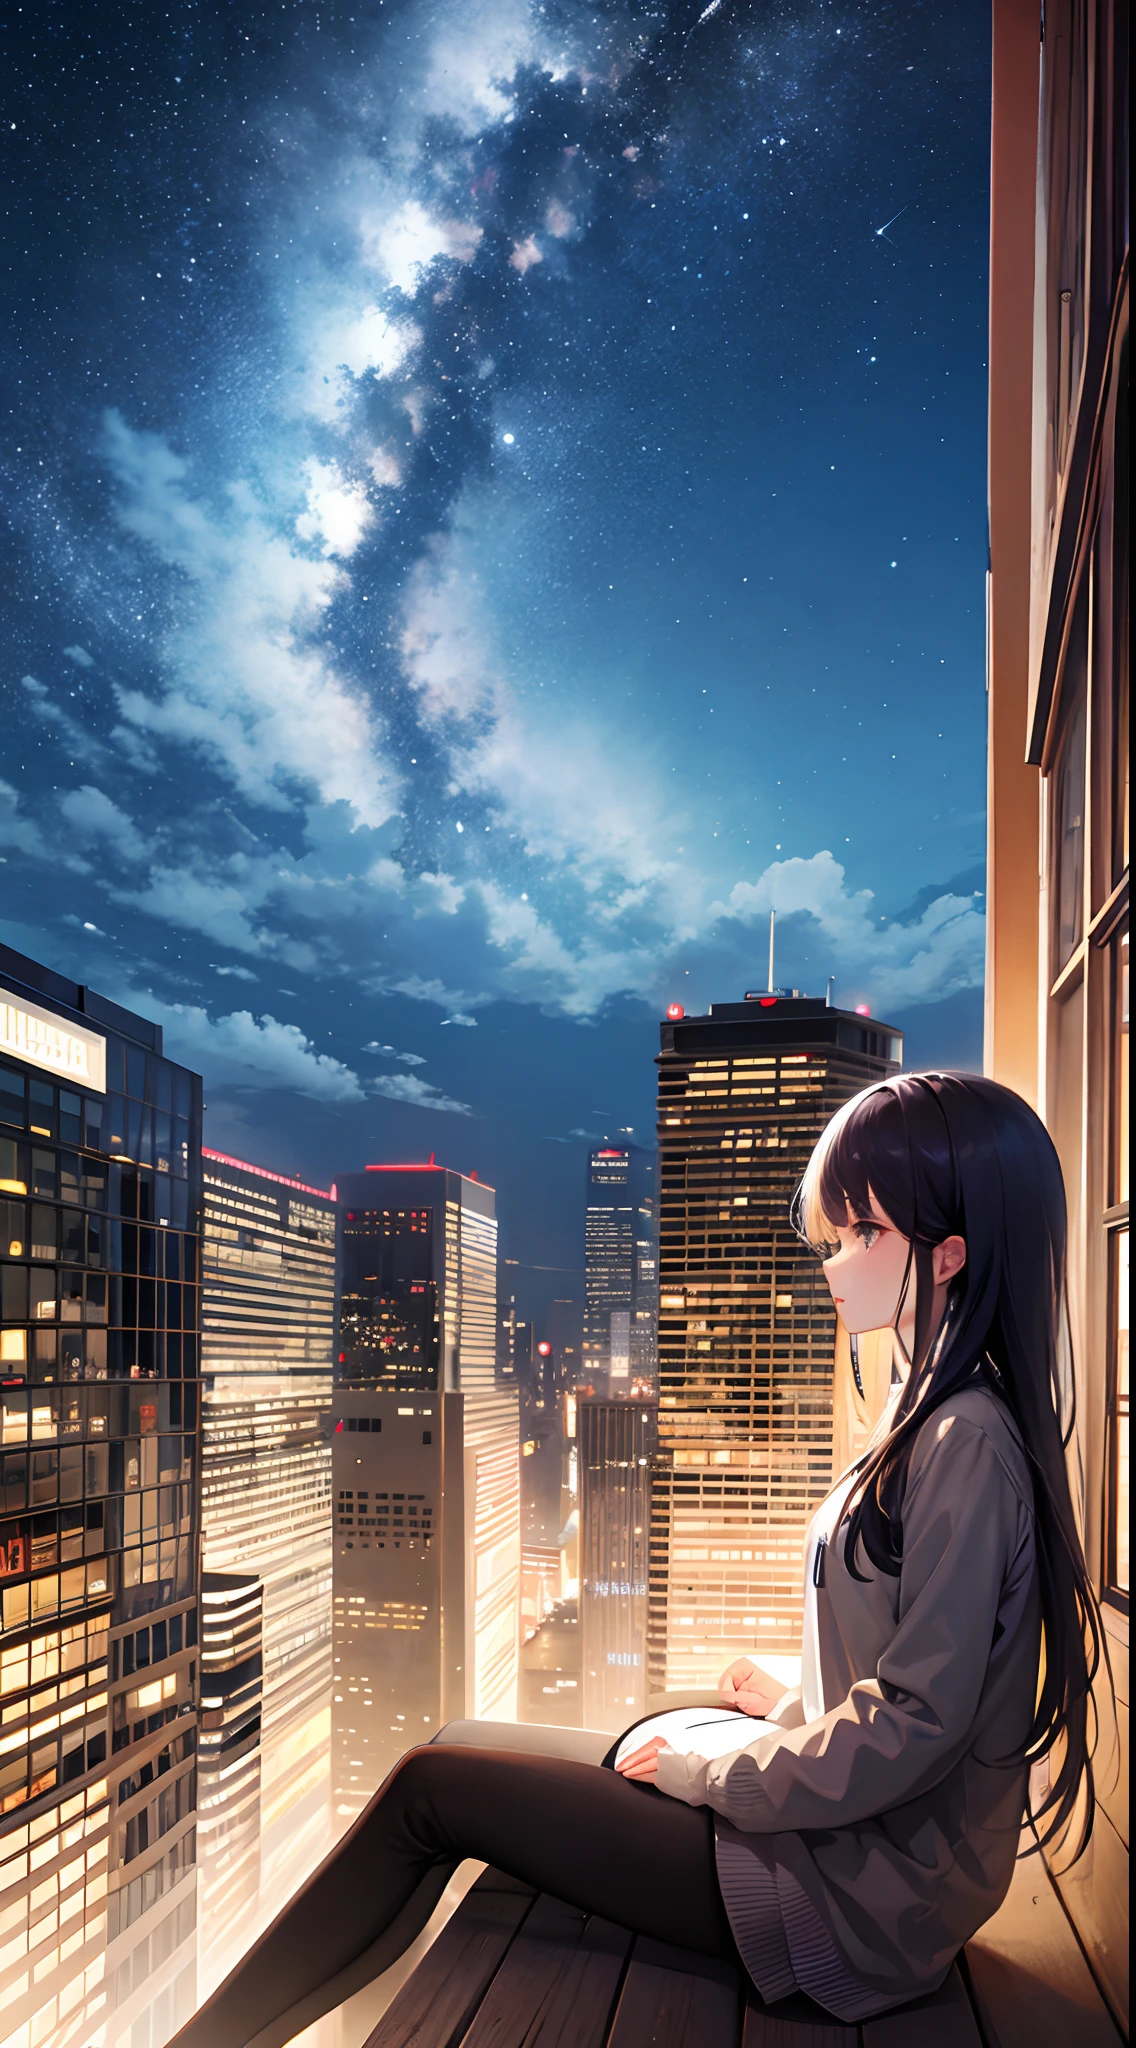 octans, sky, star (sky), scenery, starry sky, night, 1girl, night sky, solo, outdoors, building, cloud, milky way, sitting, tree, long hair, city, silhouette, cityscape,8k resolution